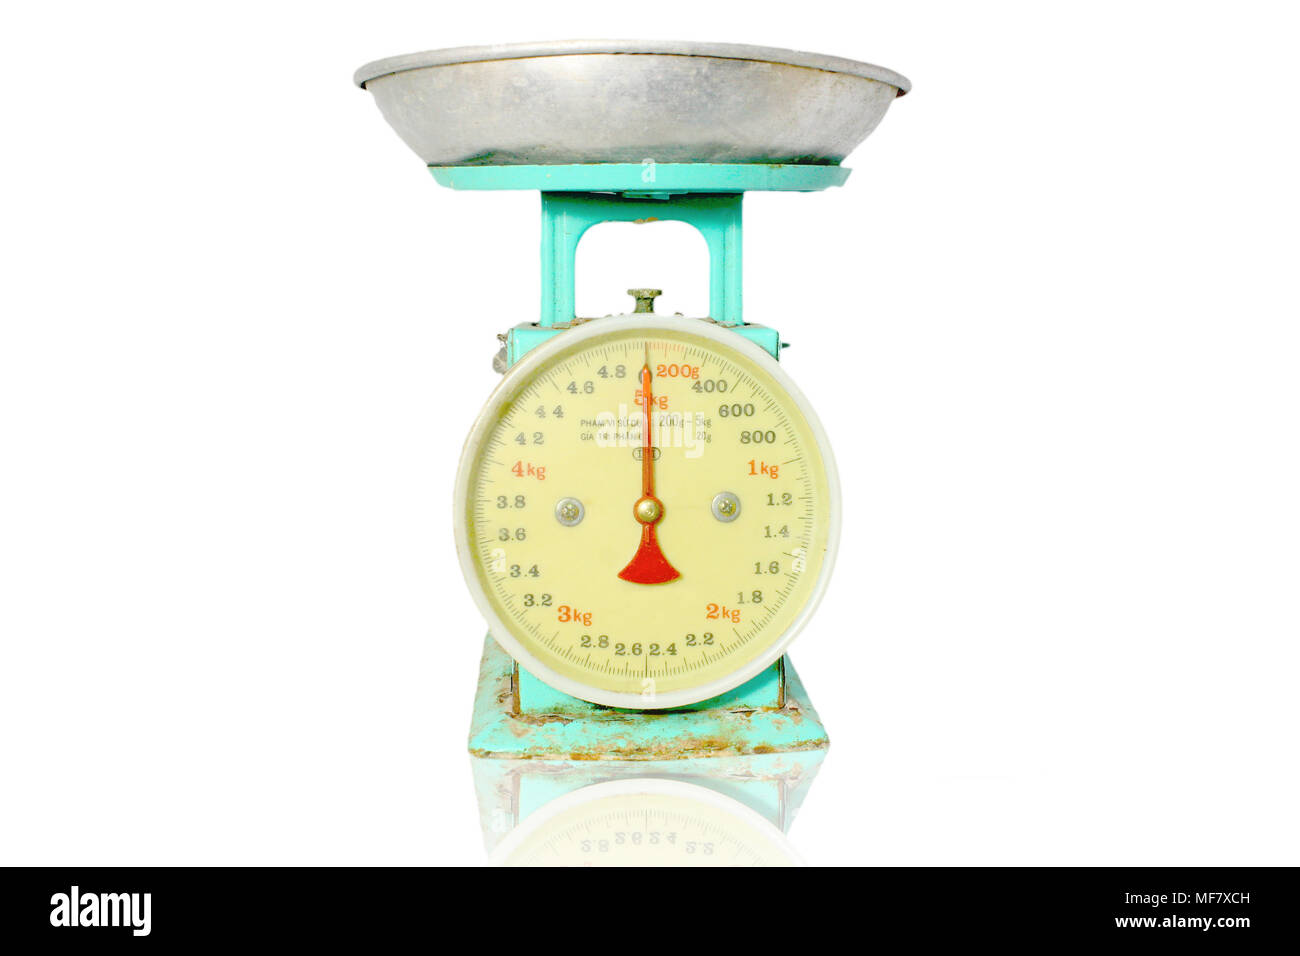 Yellow Small Weight scale stock photo. Image of kitchen - 116502930